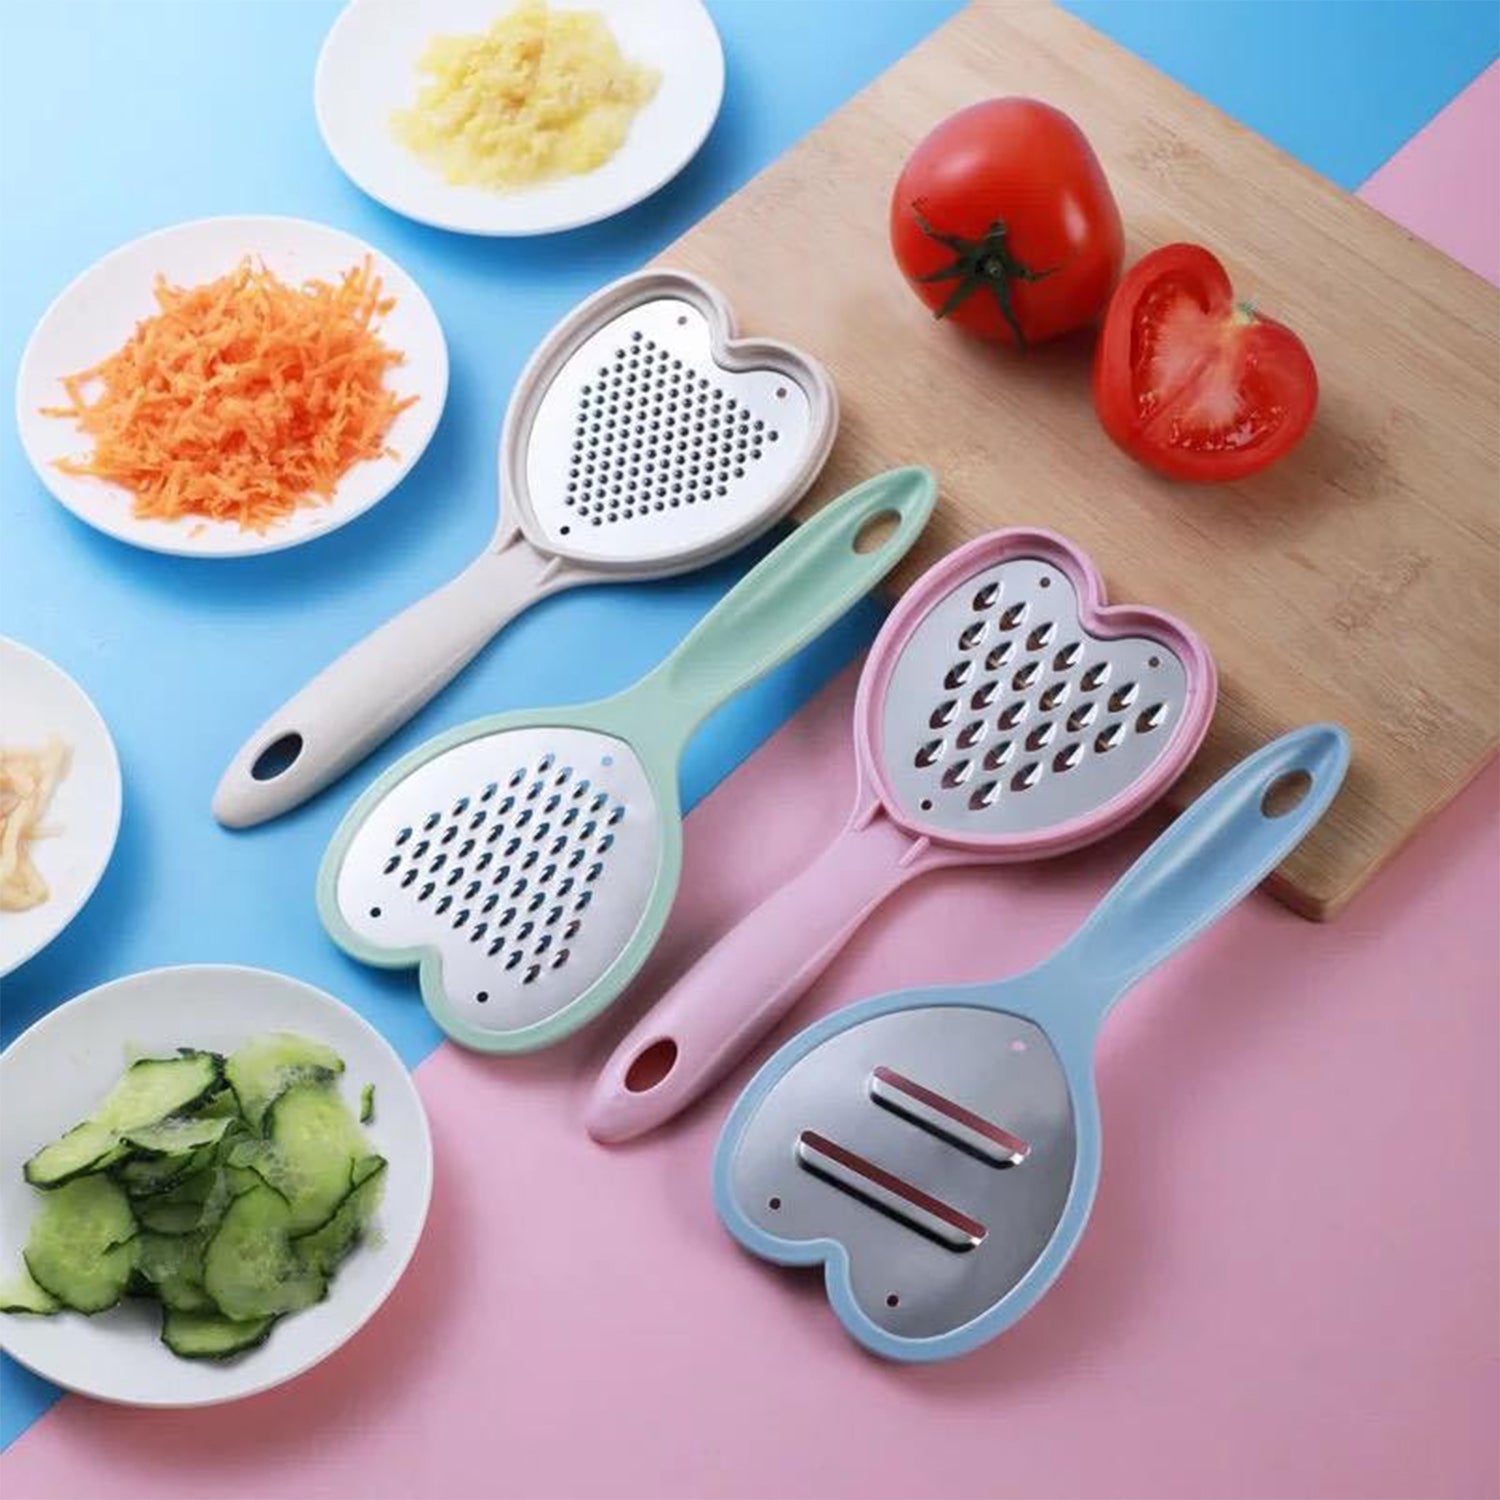 2661 Grater Set and Grater Slicer Used Widely for Grating and Slicing of Fruits, Vegetables, Cheese Etc. Including All Kitchen Purposes.